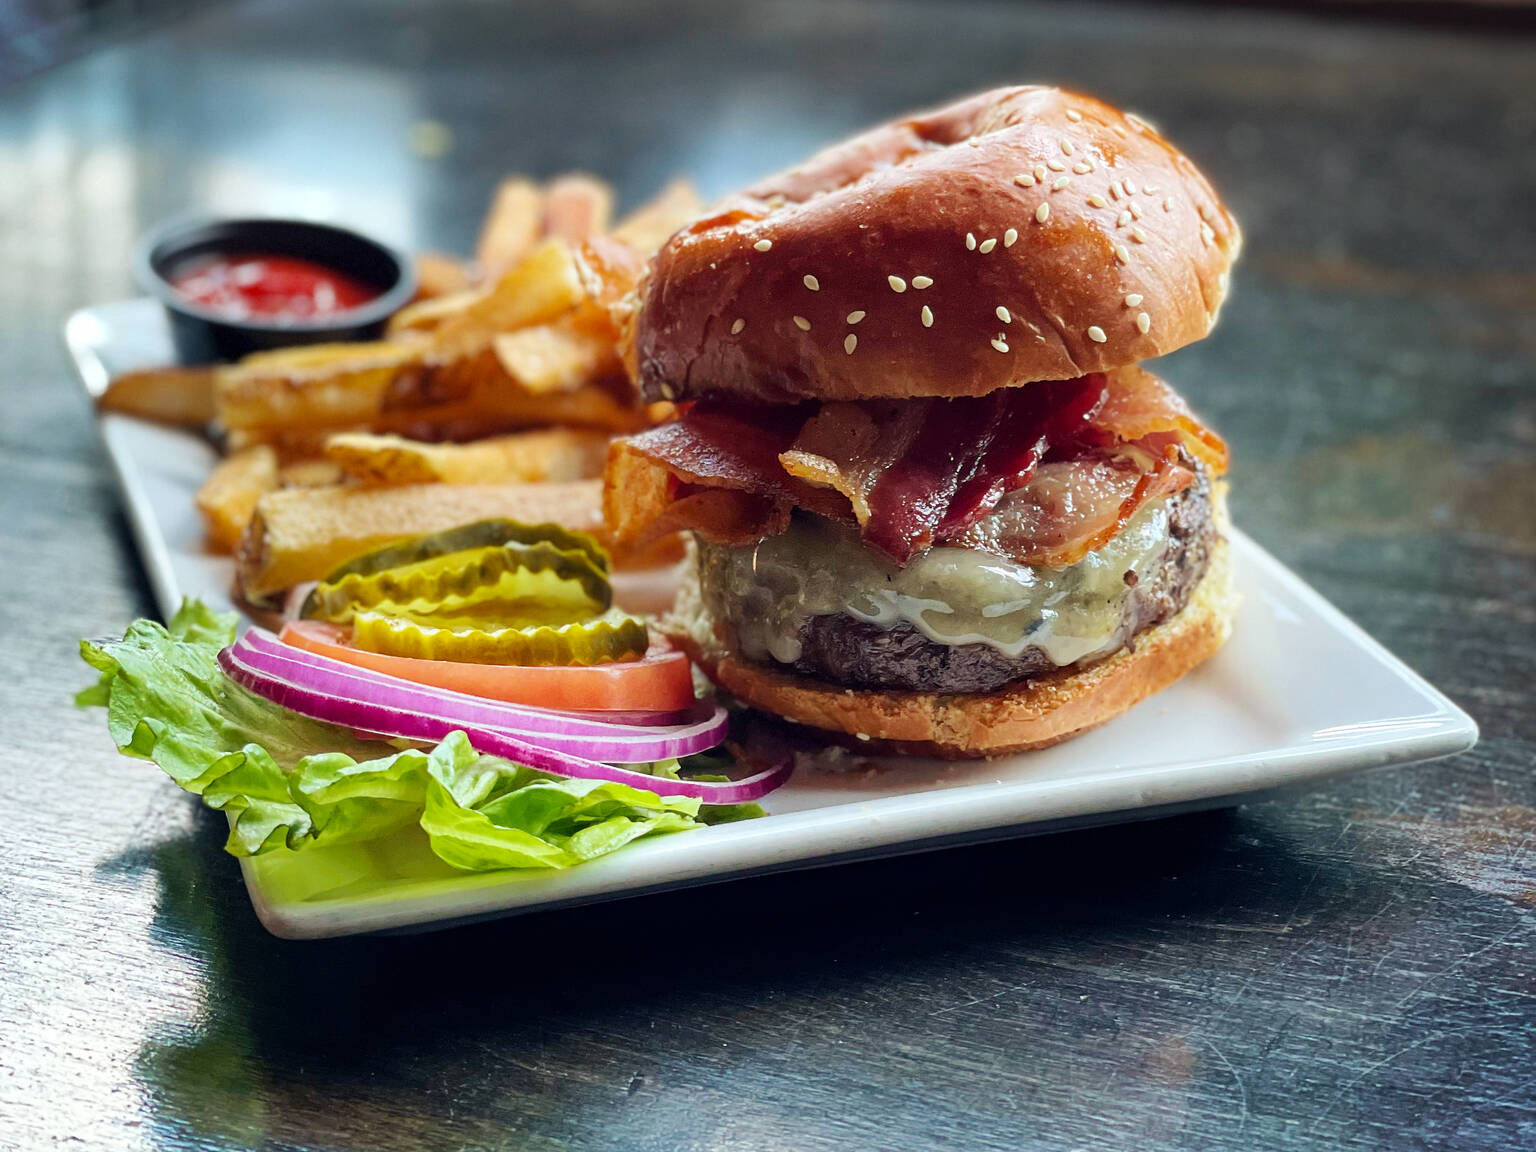 Where to Find the 17 Best Burgers in Boston